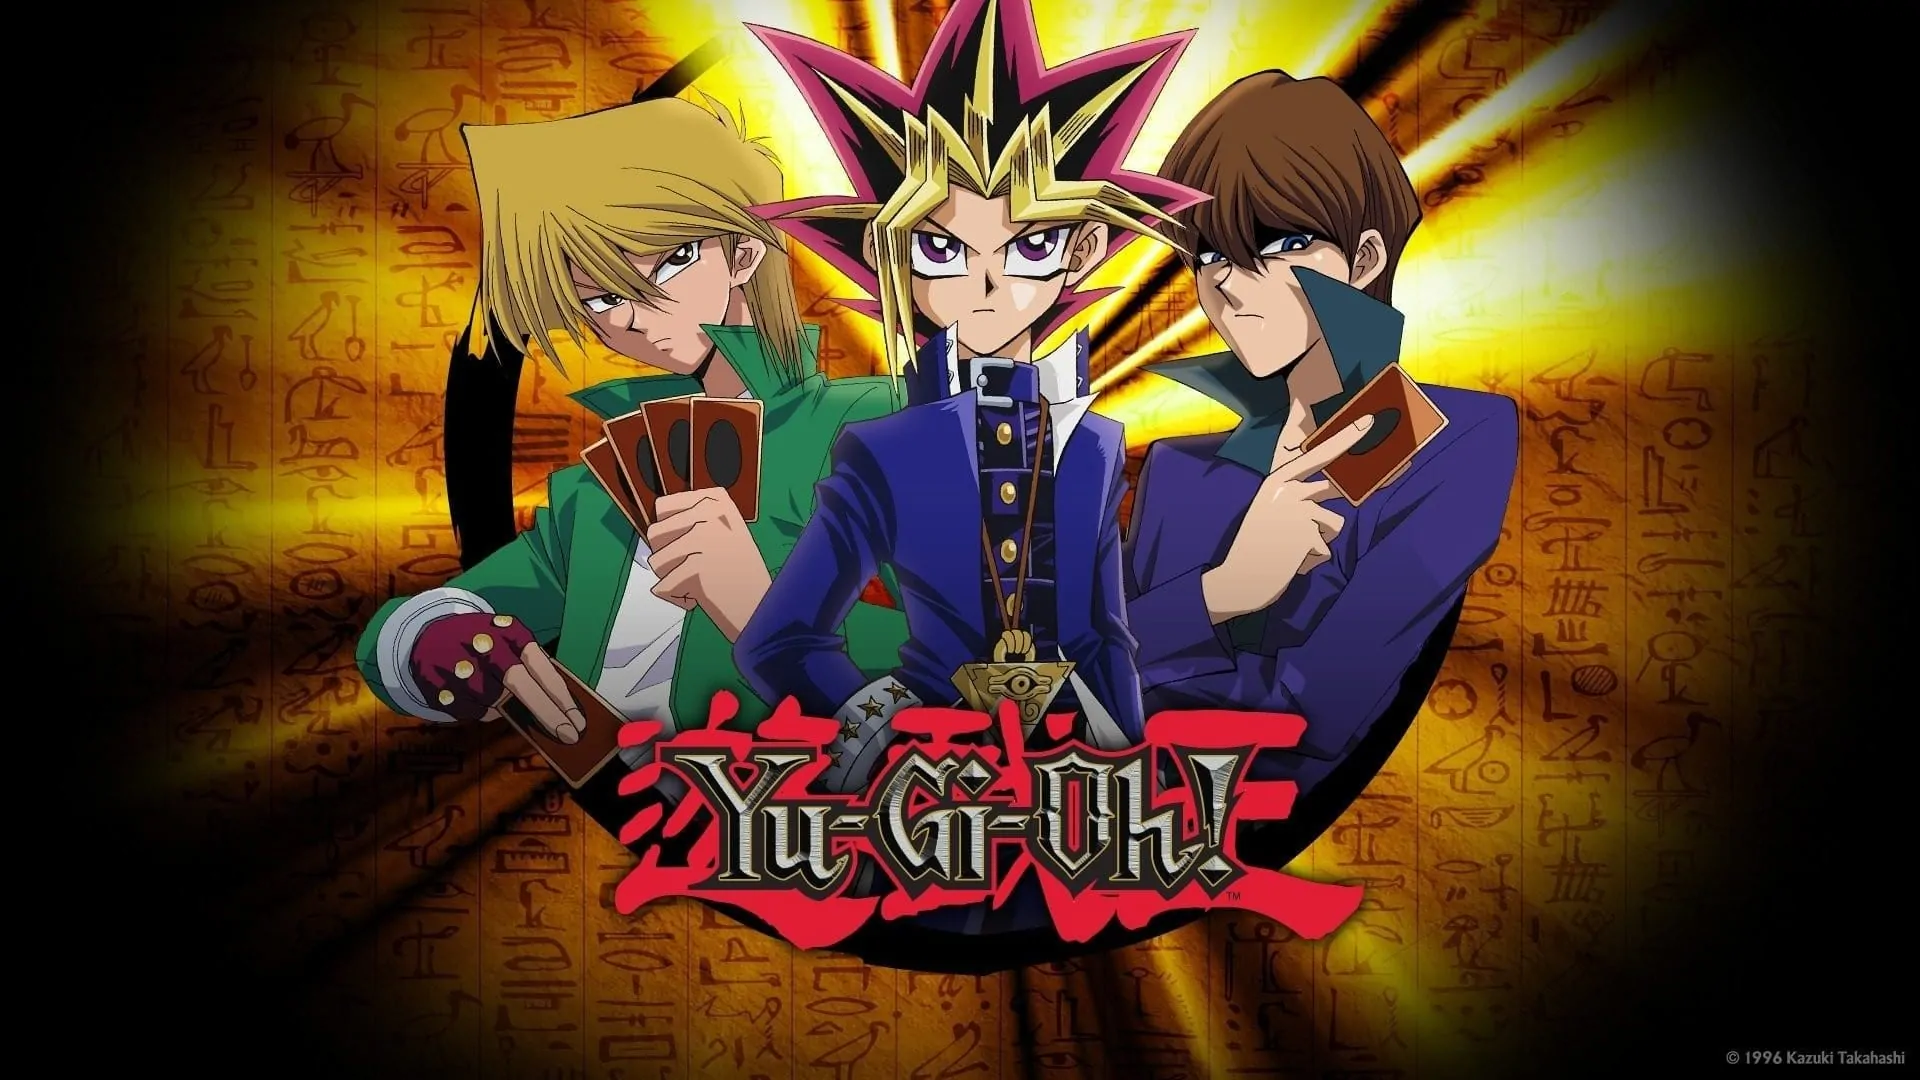 cropped 892261 large yugioh wallpaper 1920x1200 for iphone